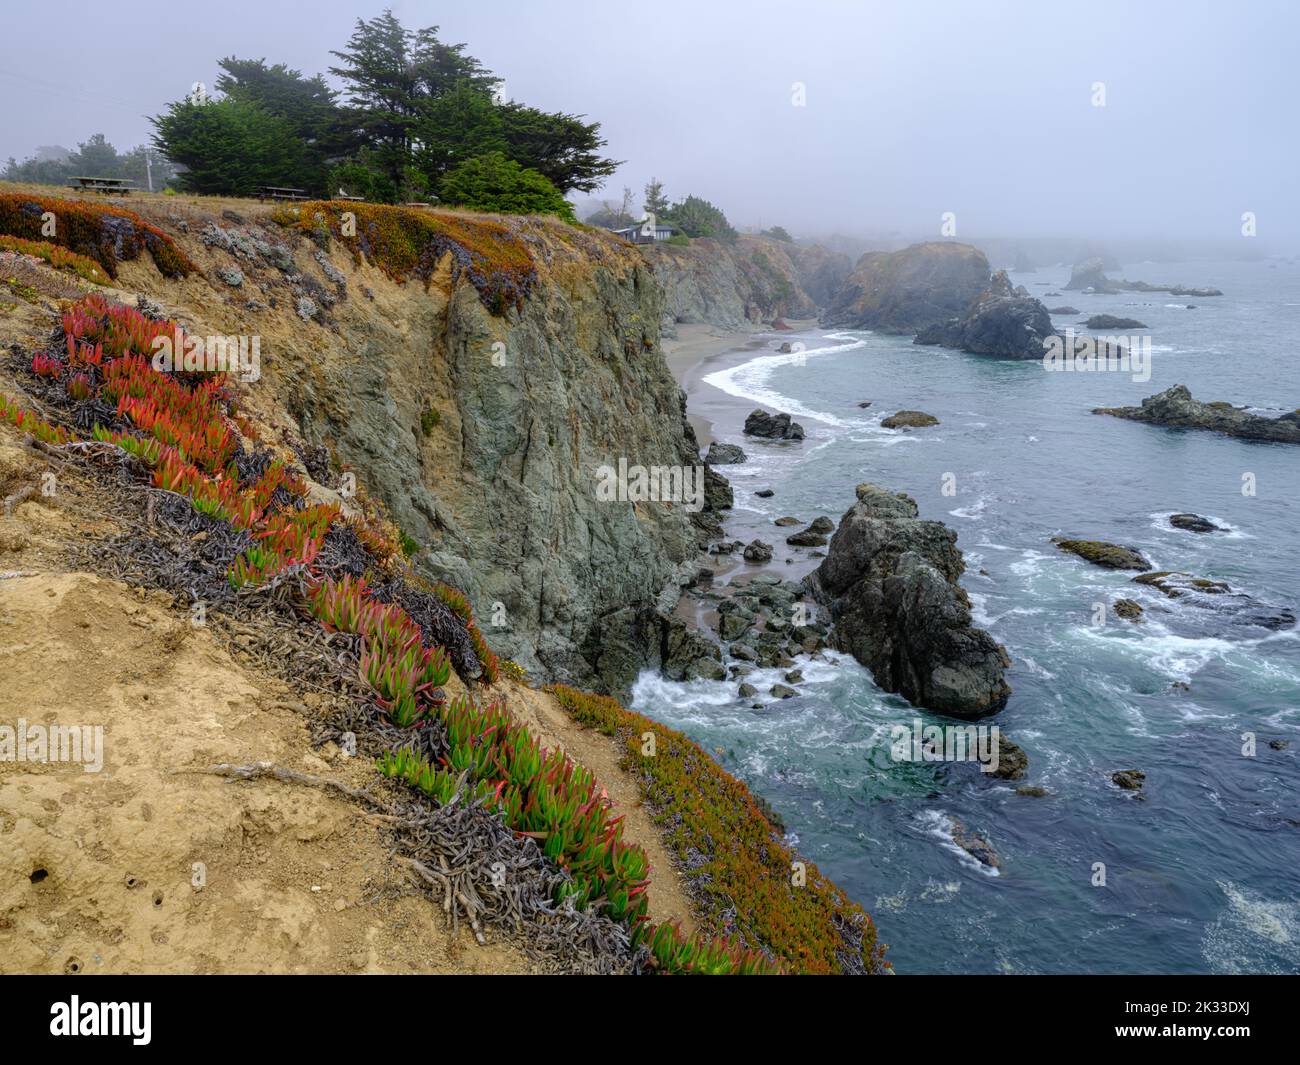 An atmospheric cliffside house with a private beach in rocky surroundings on the west coast of California Stock Photo